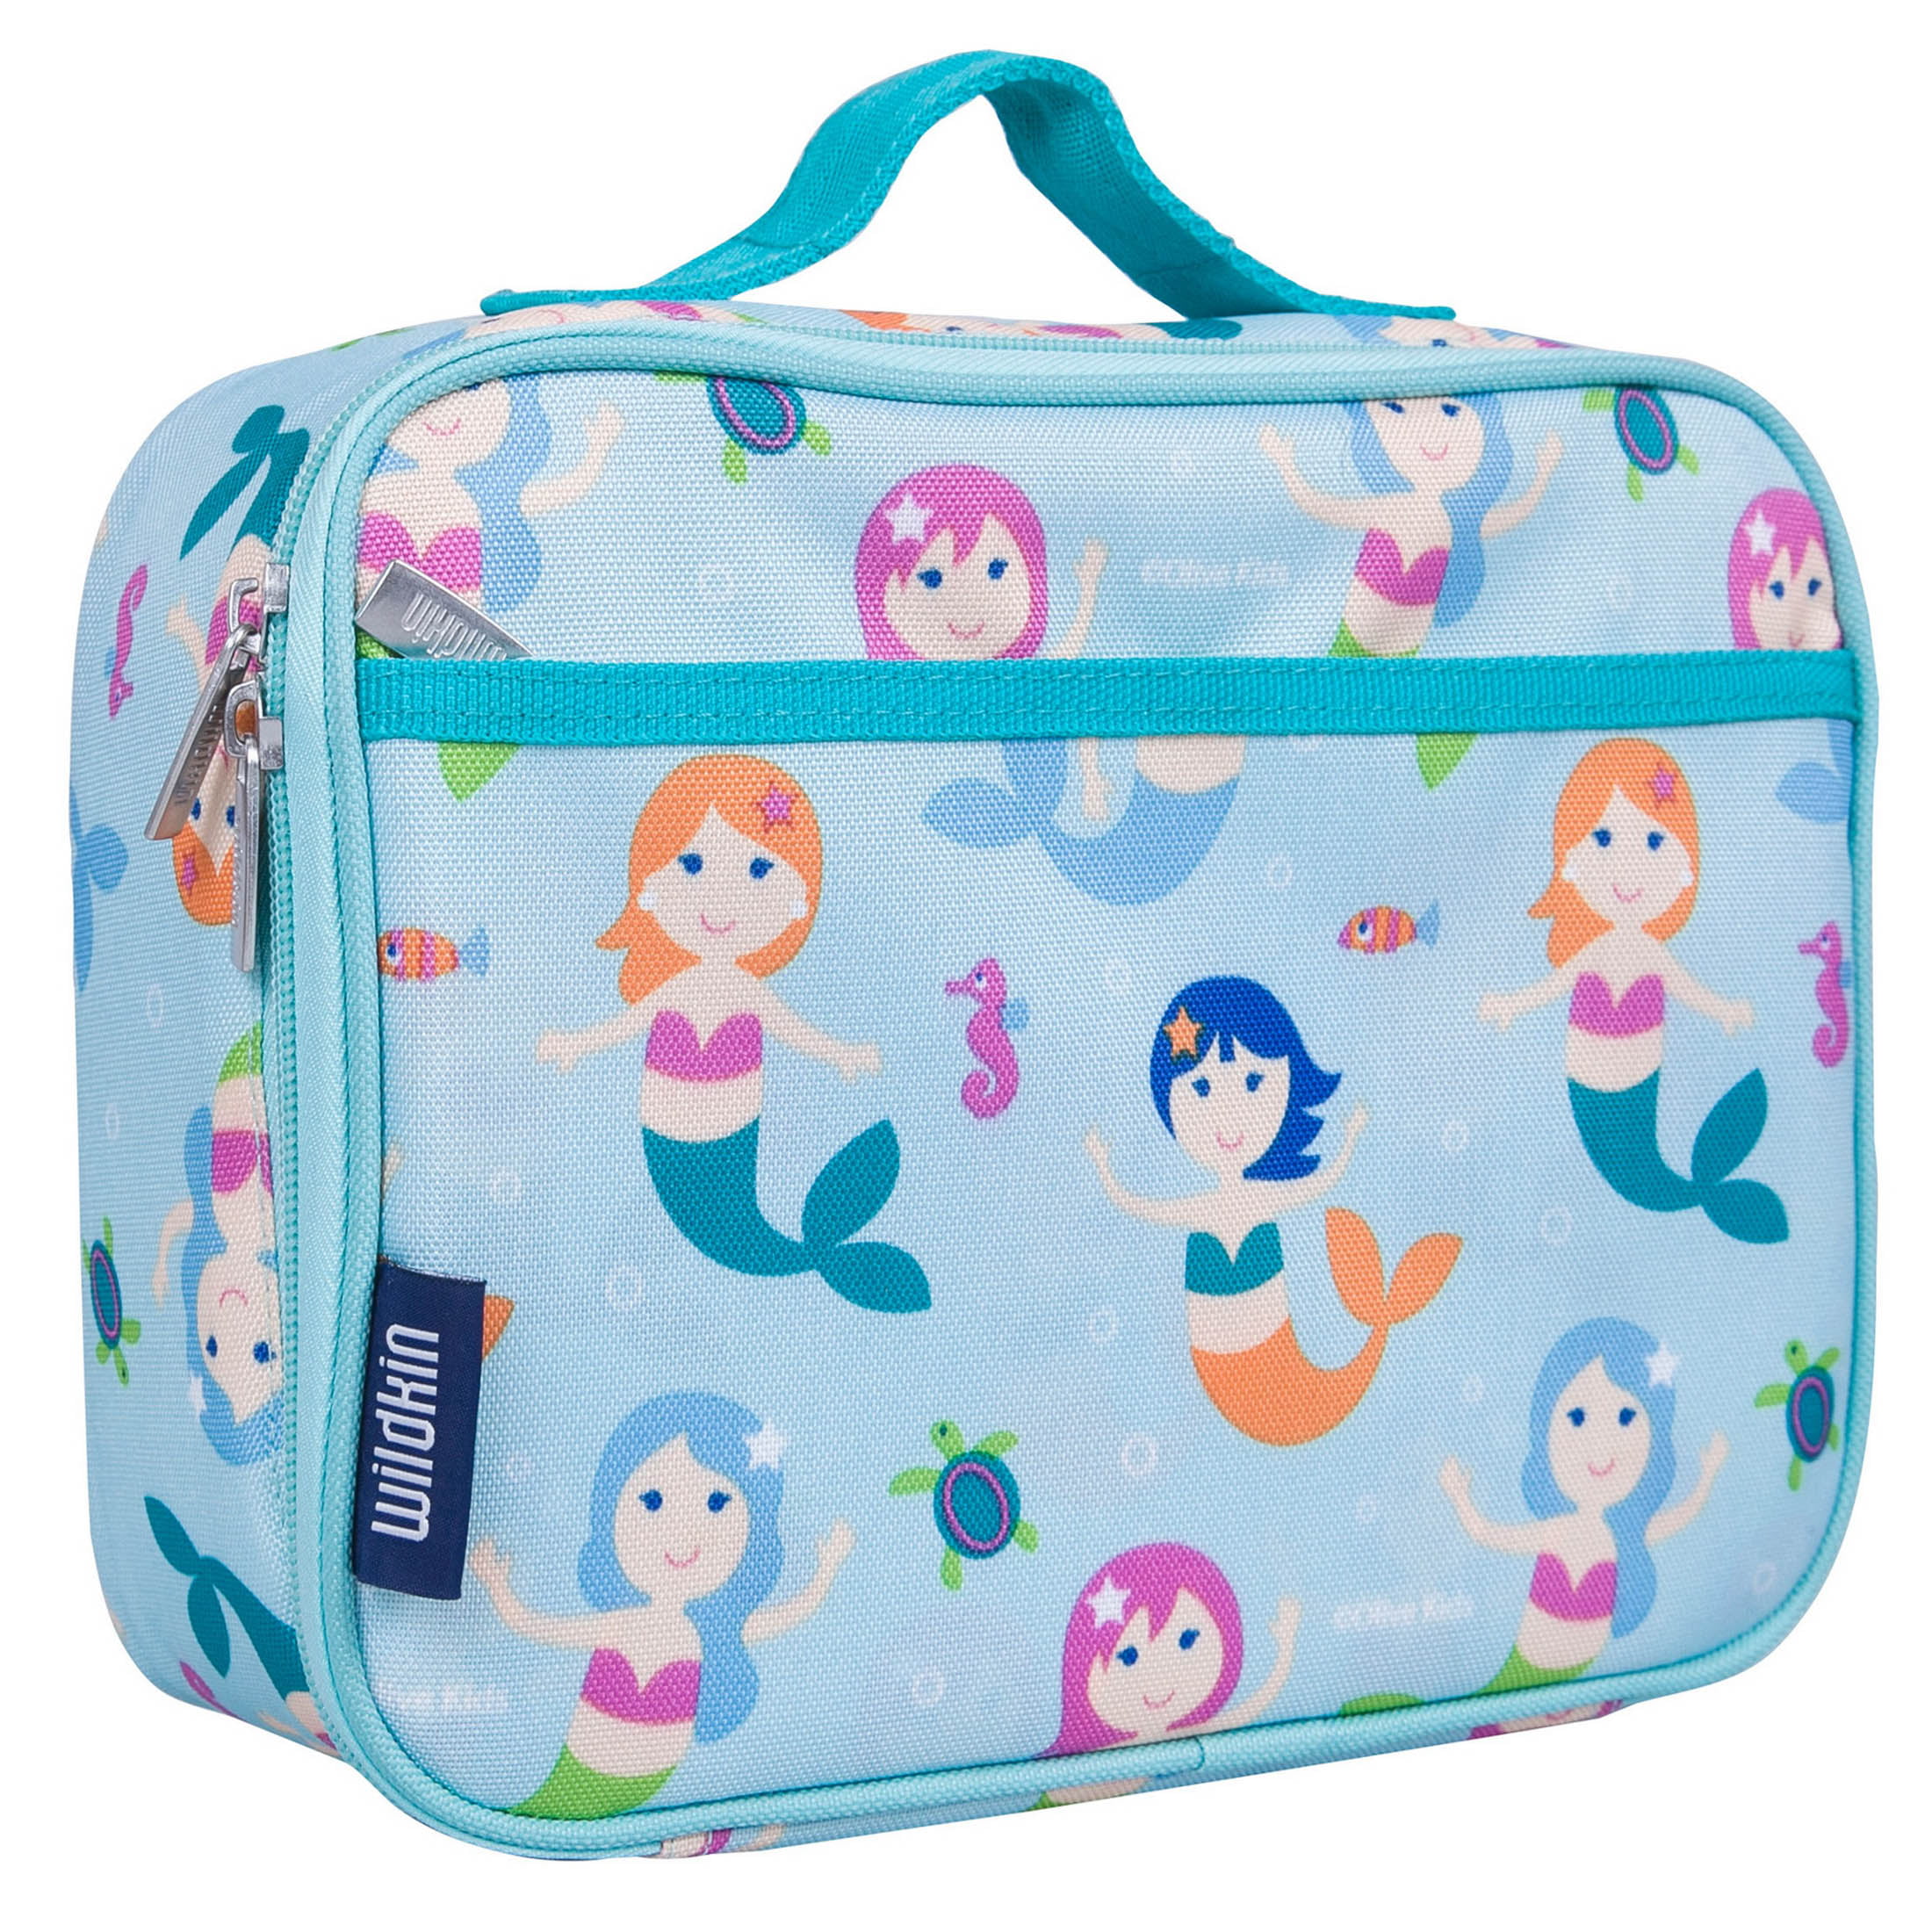 Mermaid Princesses Personalized Insulated Lunch Tote/Lunchbox 